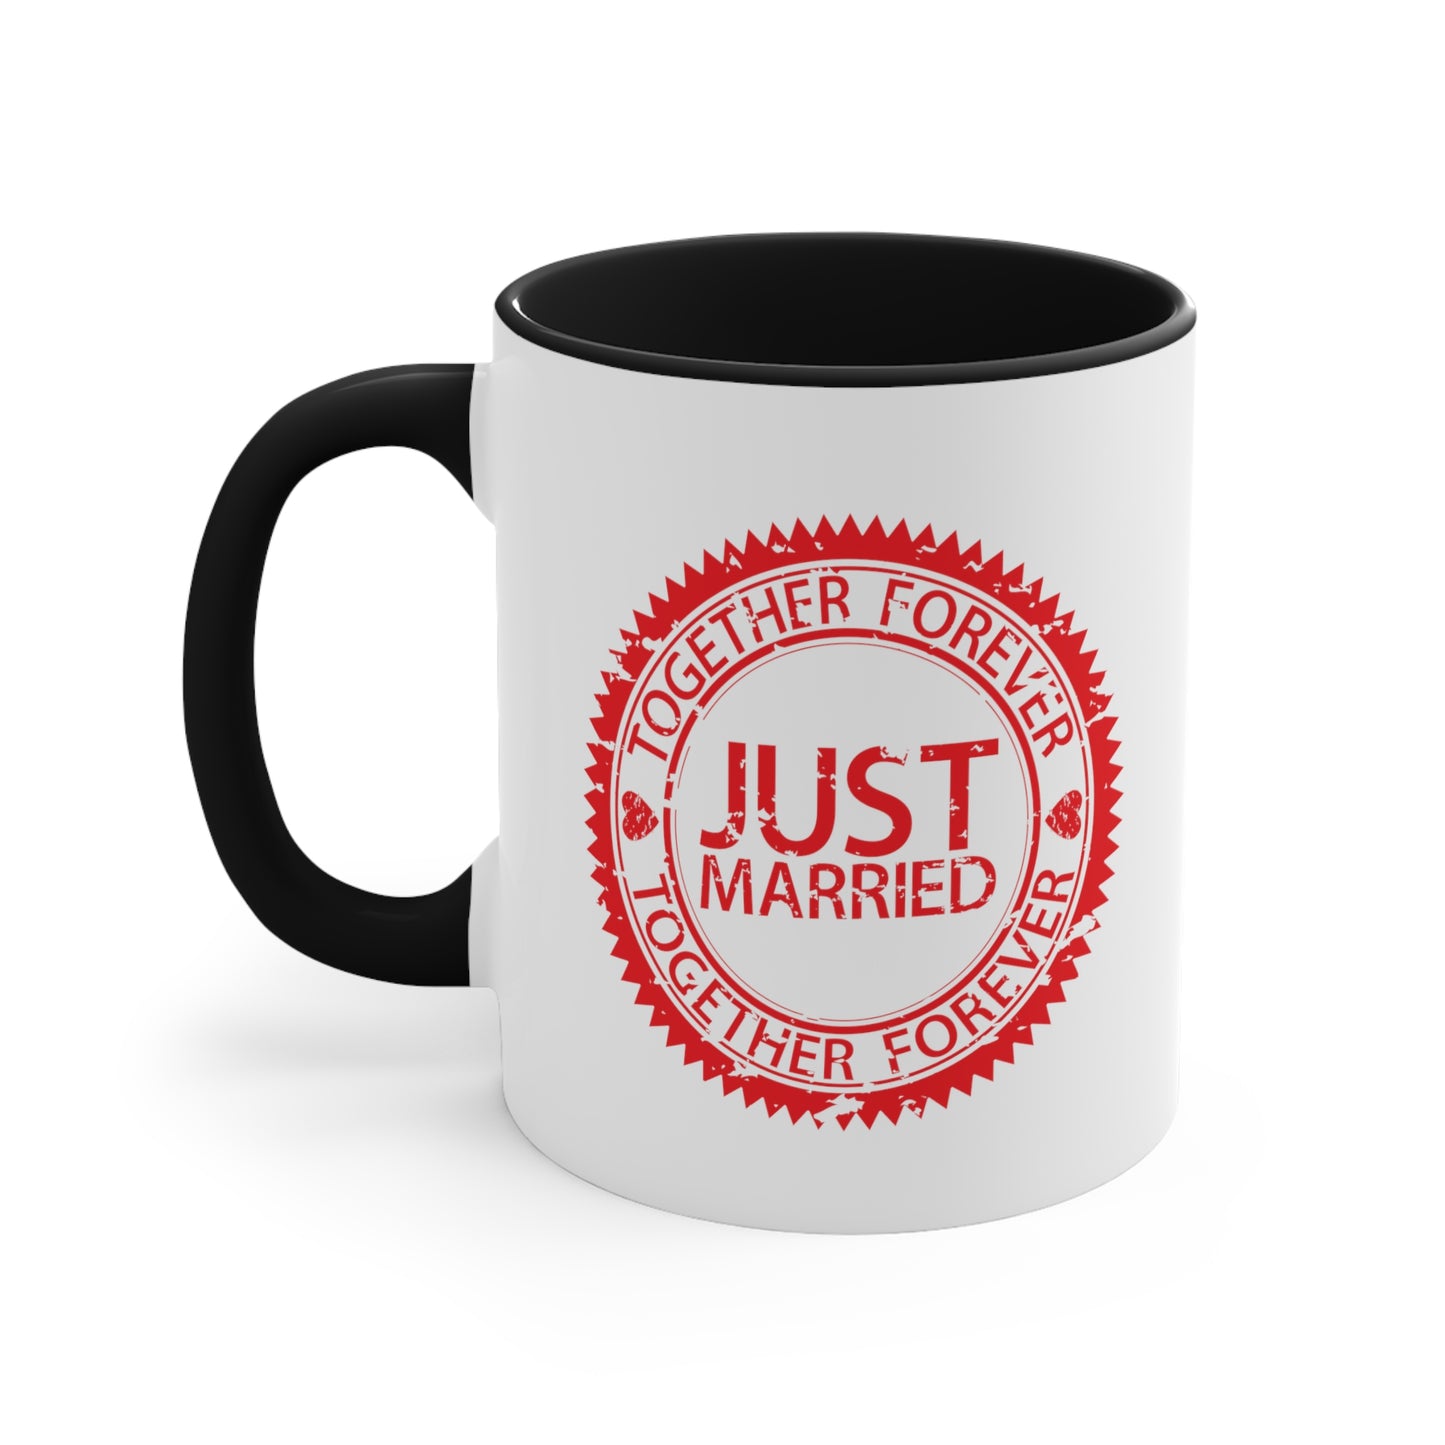 Just Married Coffee Mug - Double Sided Black Accent White Ceramic 11oz by TheGlassyLass.com